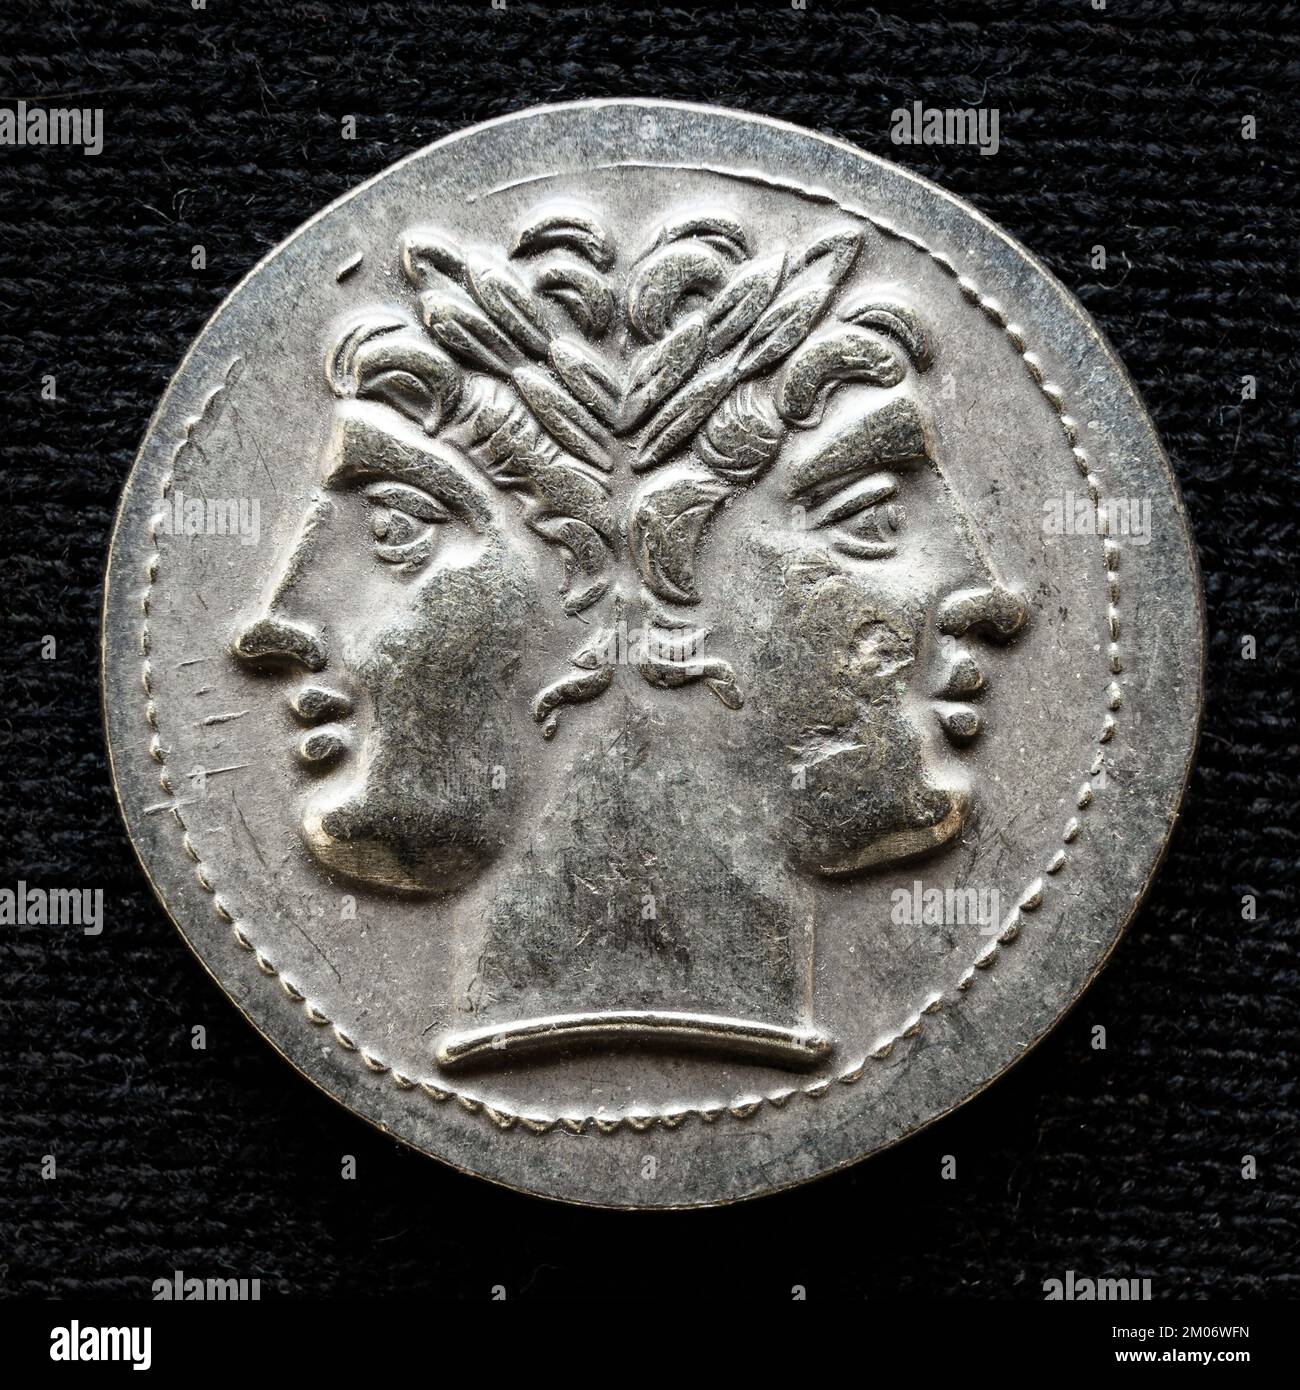 Ancient coin showing two-headed Roman god Janus, 225-214 BC. Old rare money, silver didrachm isolated on dark background, macro. Concept of Rome, valu Stock Photo